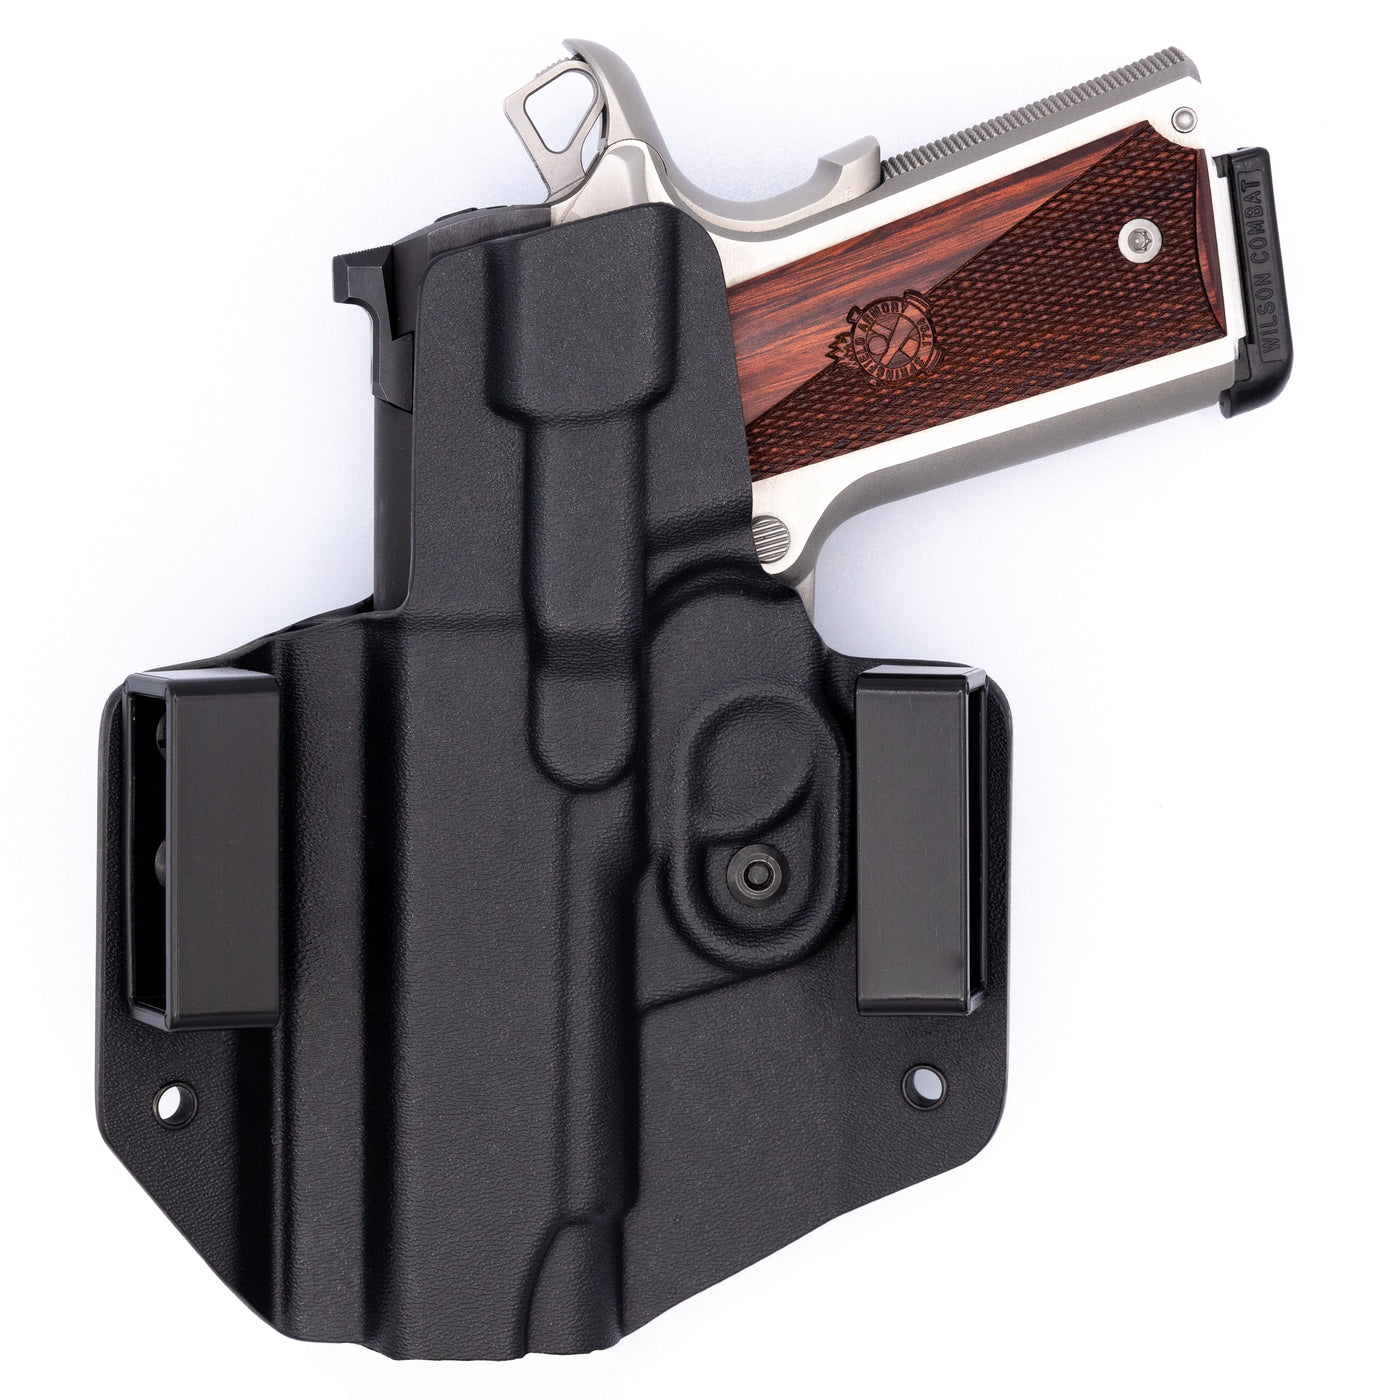 This is a quickship C&G Holsters OWB Outside the waistband Holster for the Springfield EMP Champion 1911.